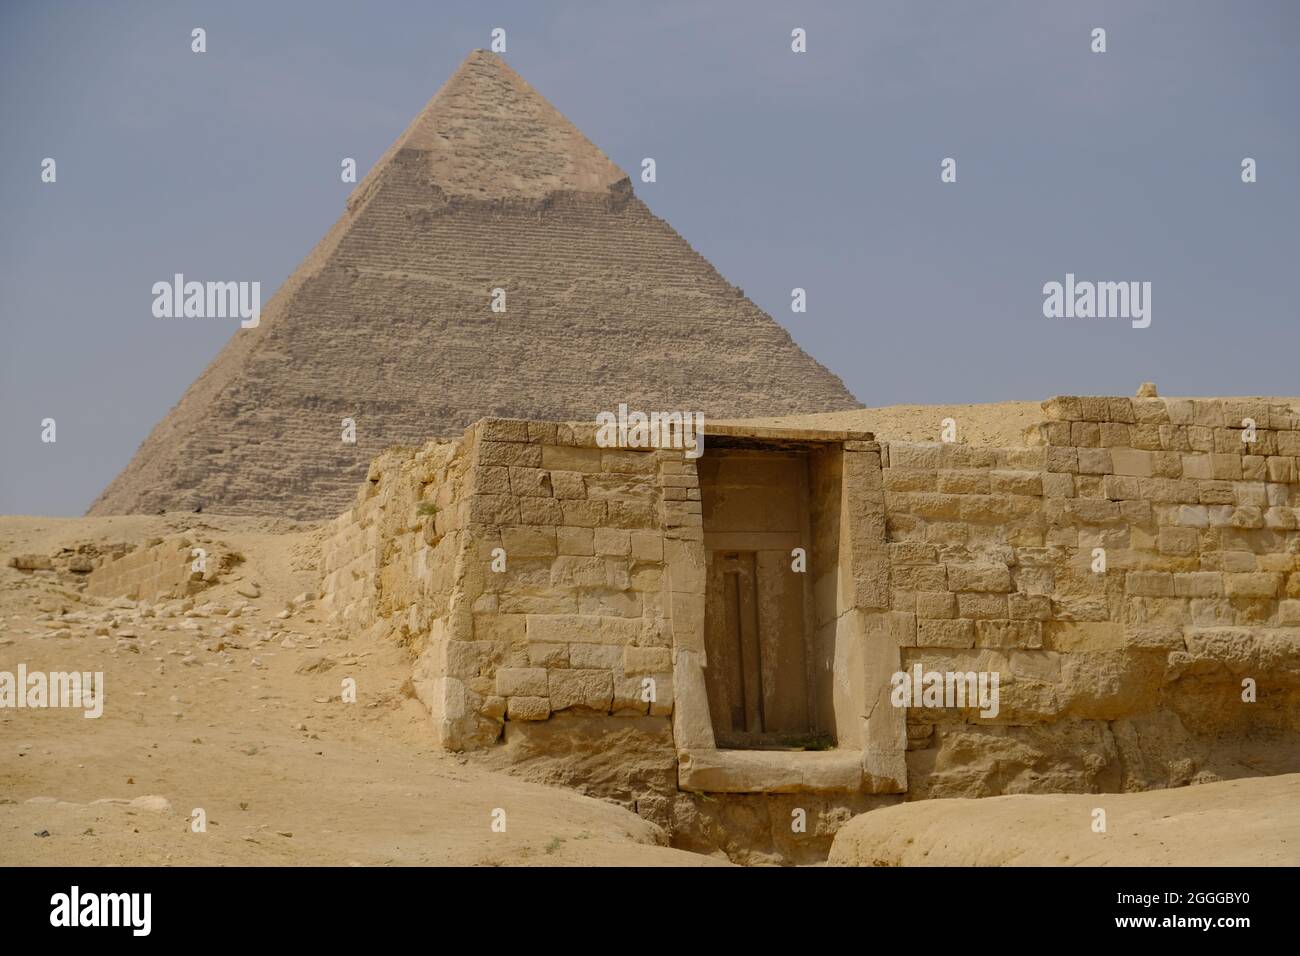 Egypt Cairo - The Pyramid of Khafre and surrounding buildings Stock Photo